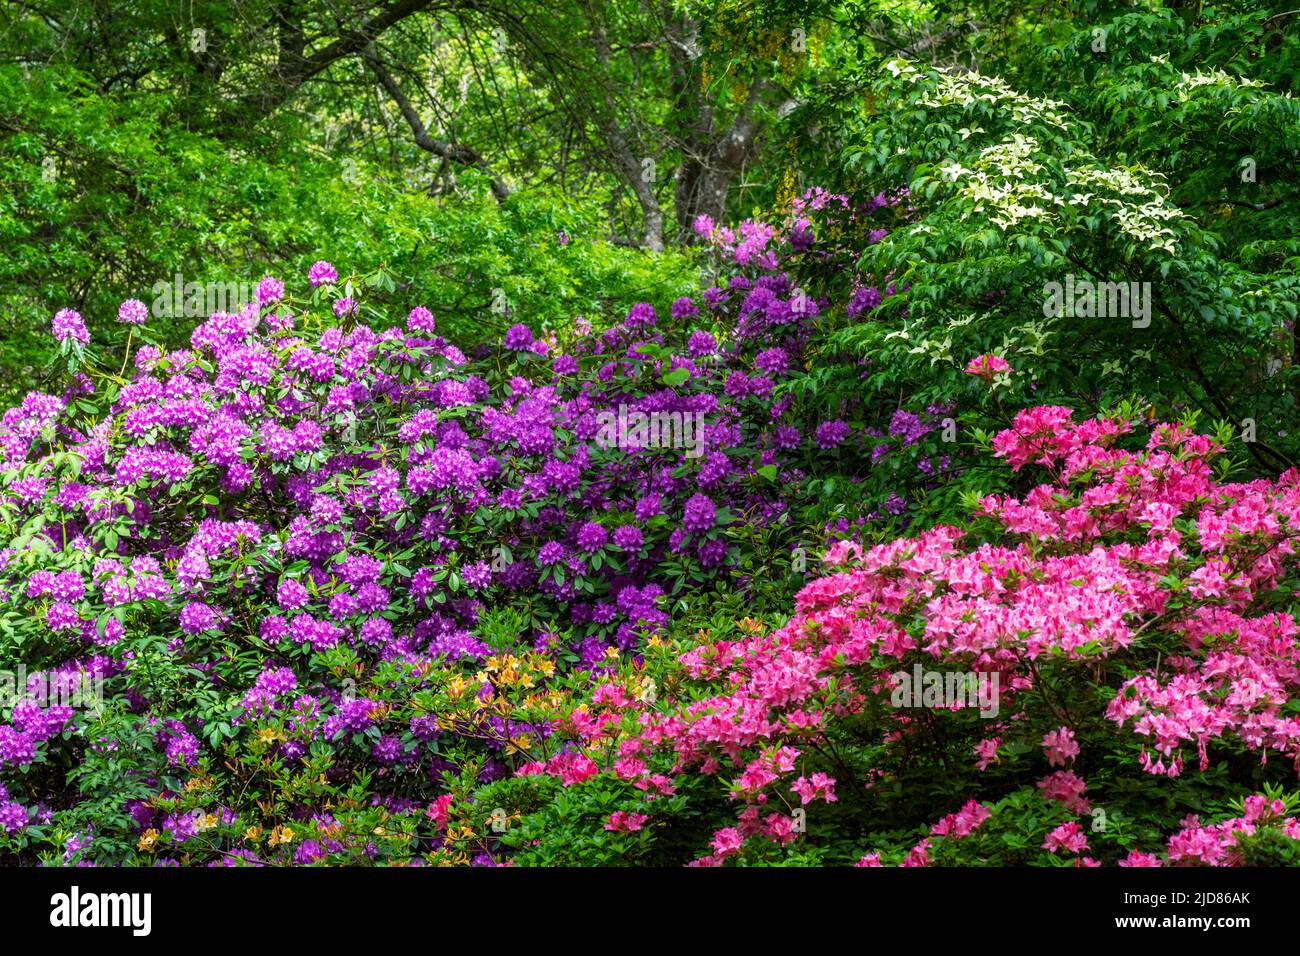 Rododendron and Azalea shrubs in a woodland setting Stock Photo